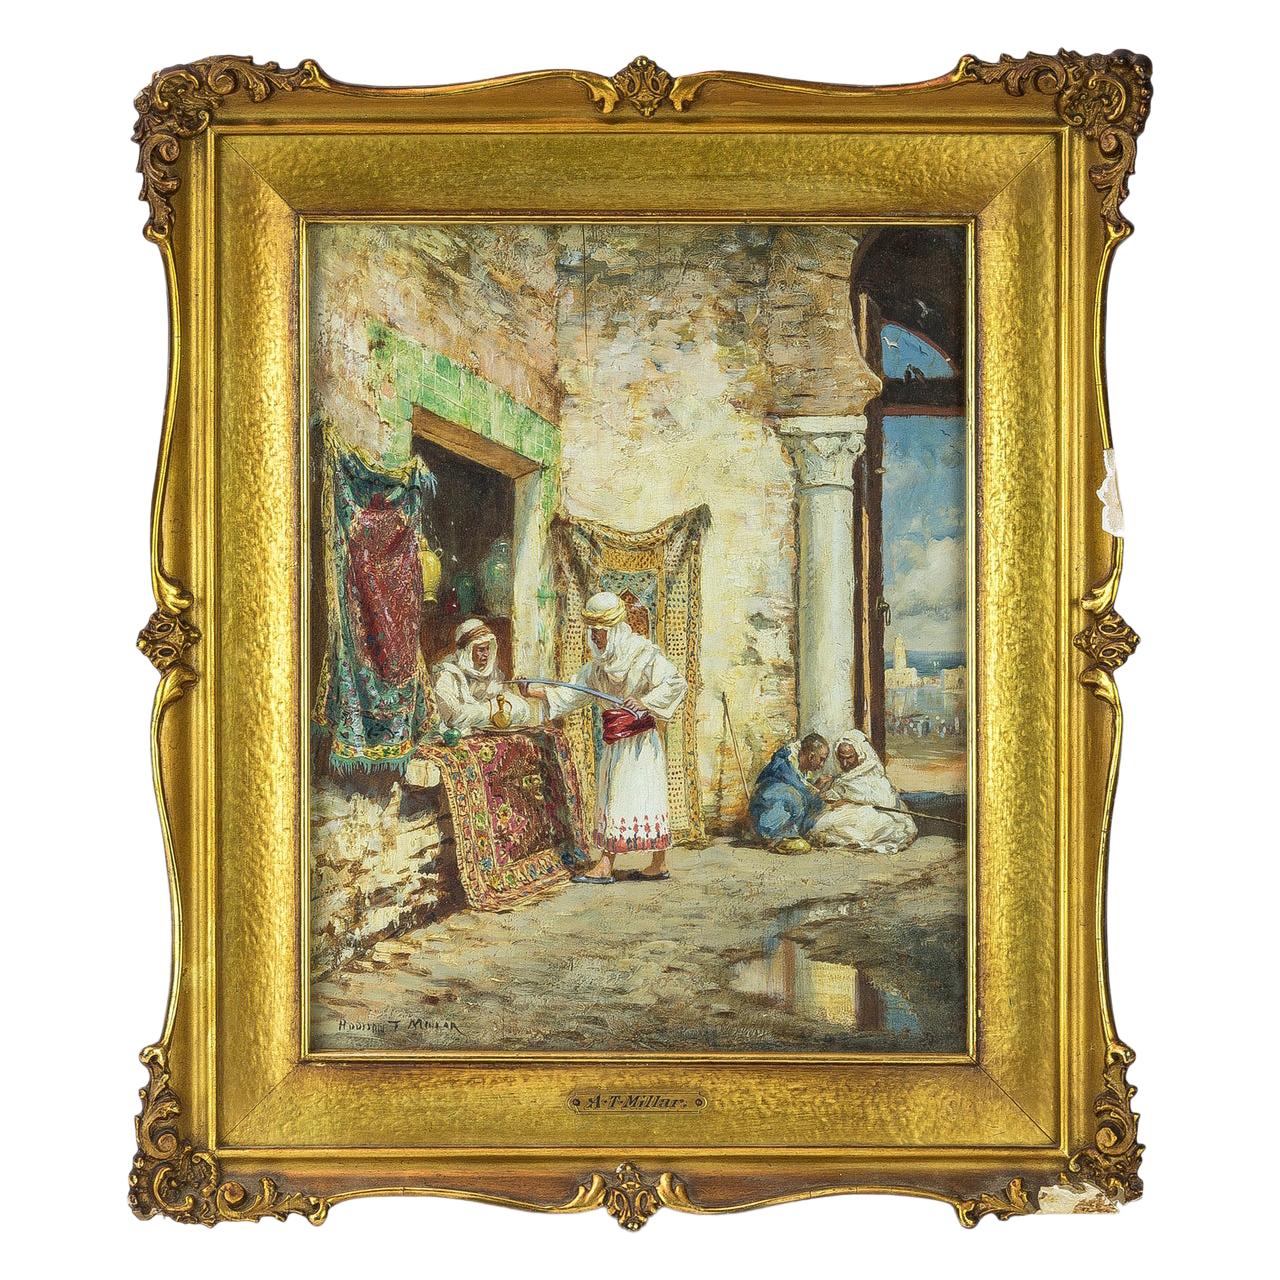 Original French Orientalist Painting of a Sword Merchant by Addison Millar